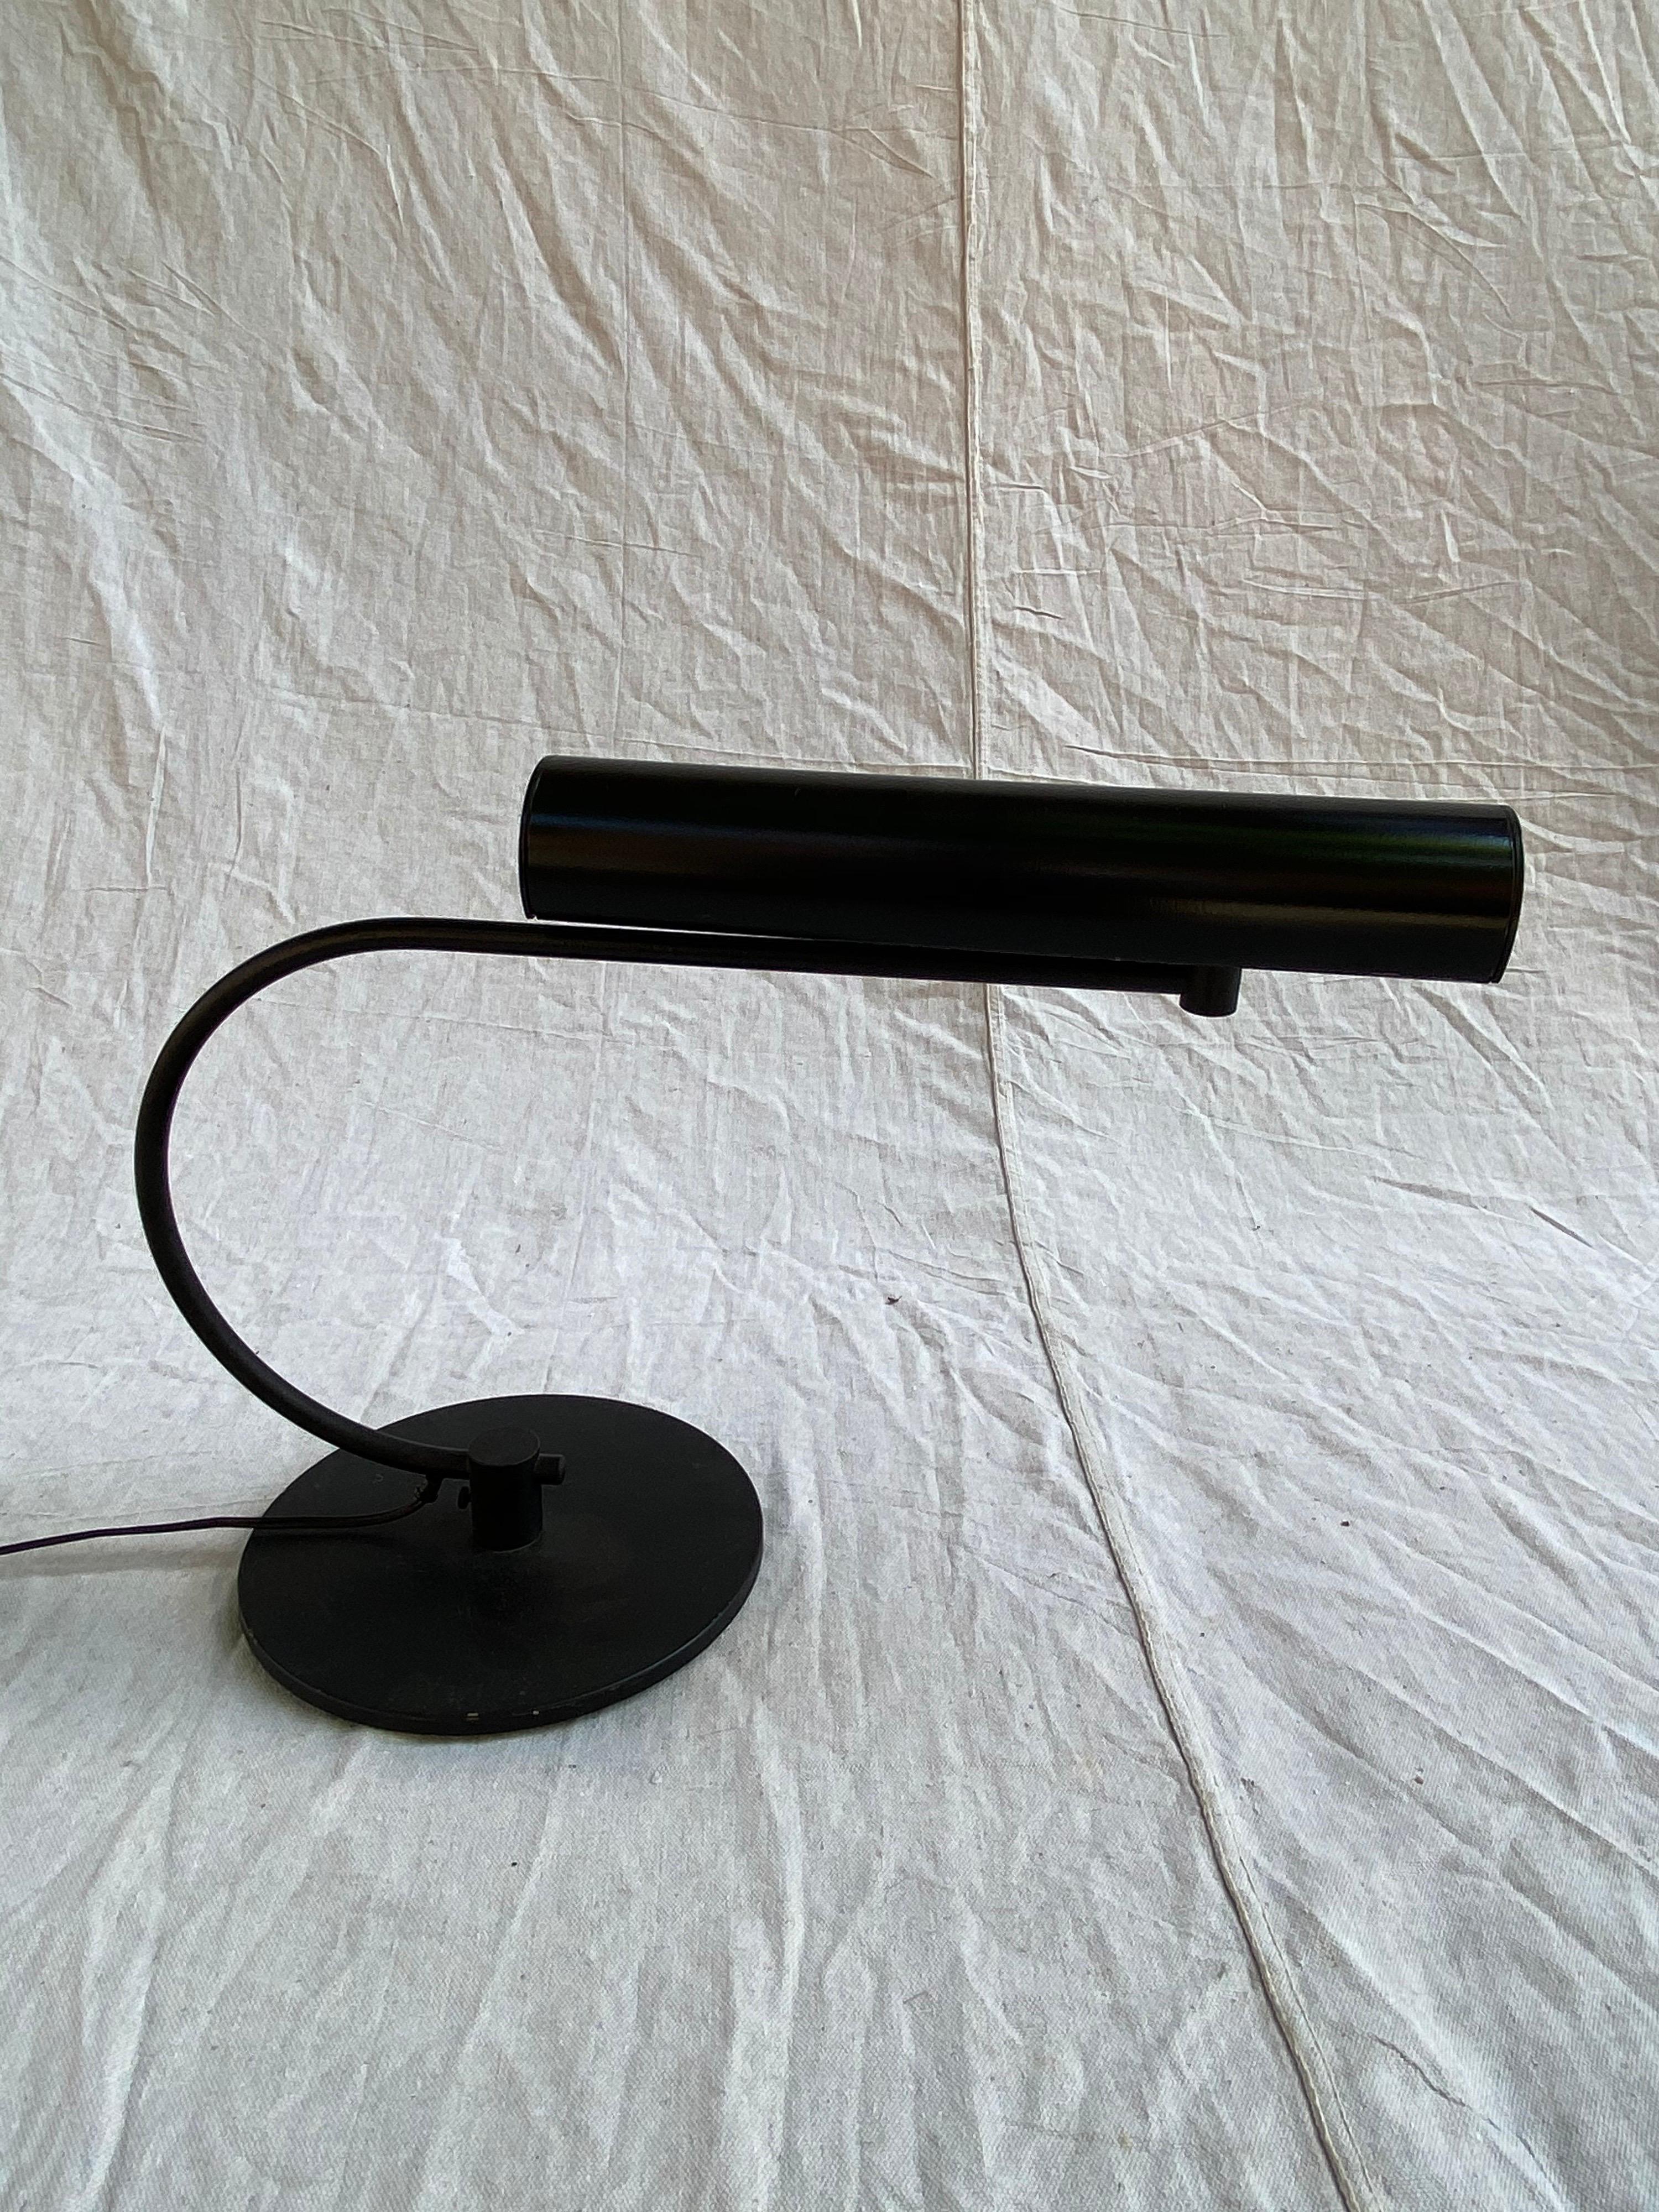 TSAO desk lamp, 1970s lamp, American made new haven conn. Very adjustable shade pivots and turns in multiple positions.